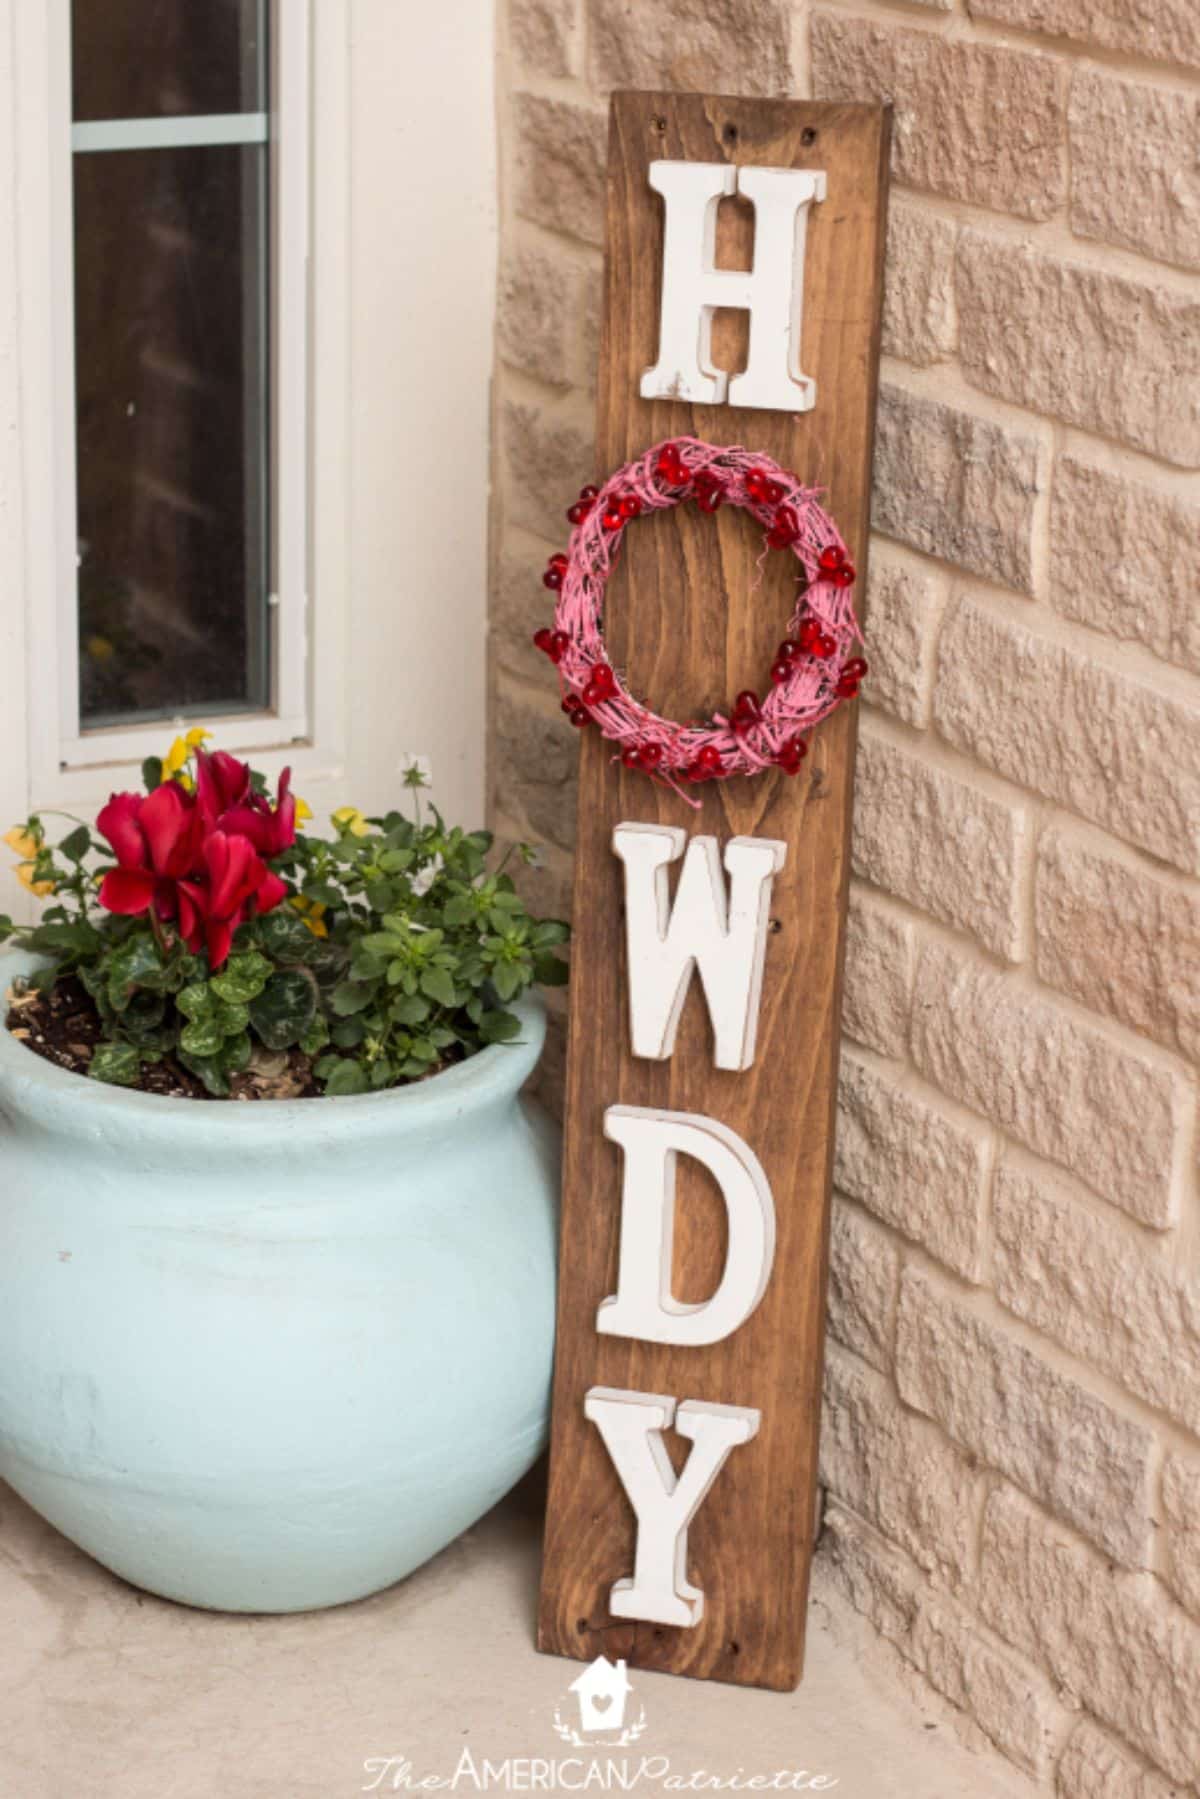 DIY Howdy Front Porch Pallet Sign with Interchangeable Seasonal Wreaths